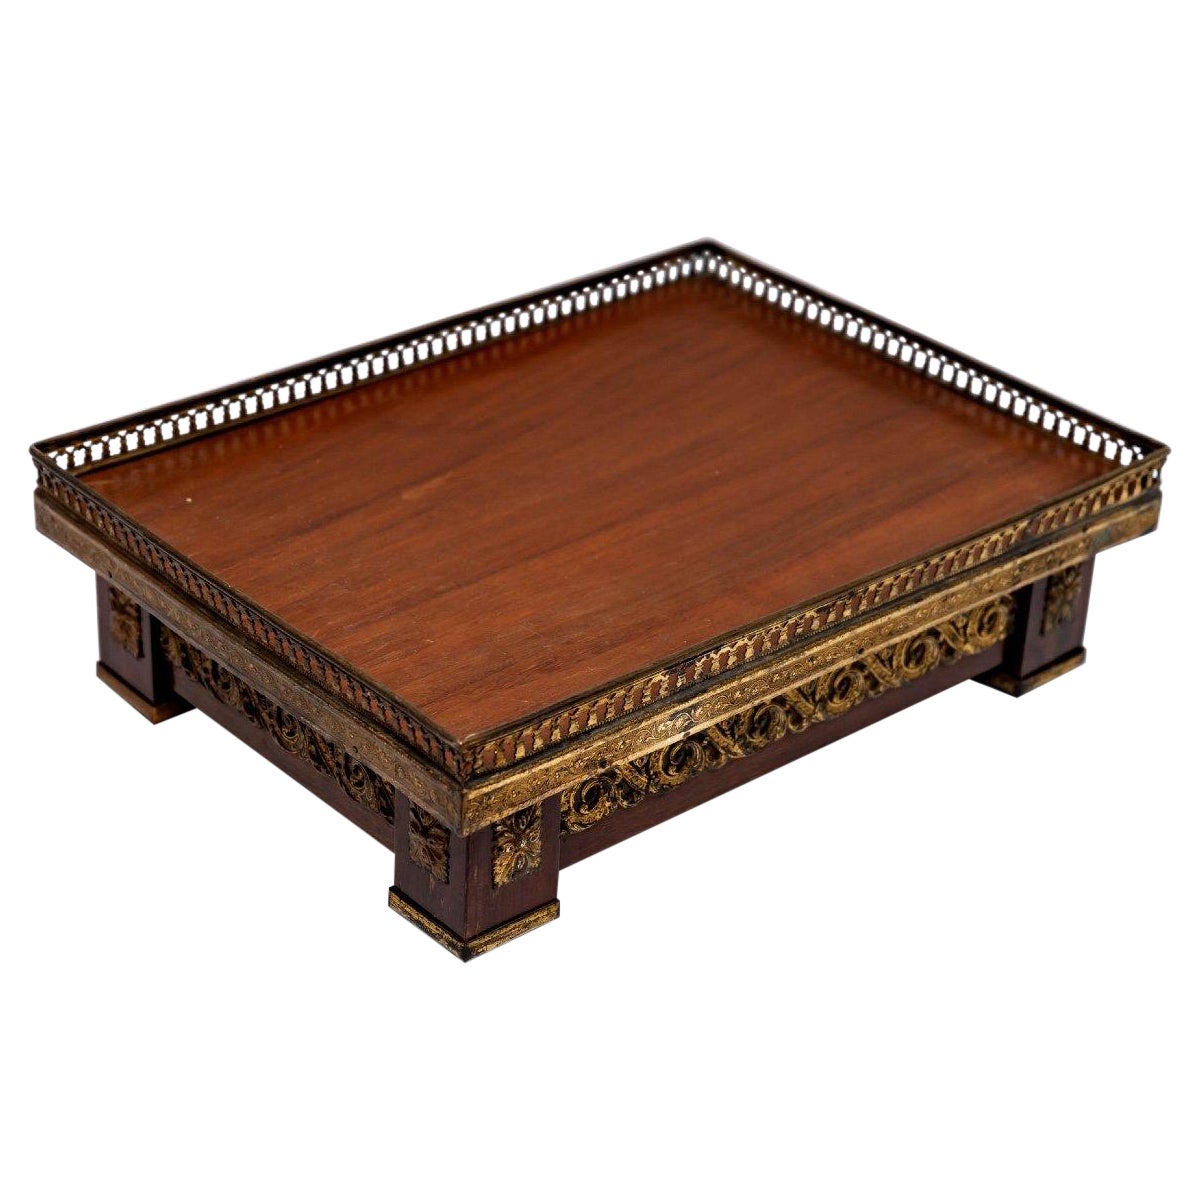 Ceremonial Tea Tray - Exotic Wood And Brass - Vietnam - Period: Art Nouveau For Sale